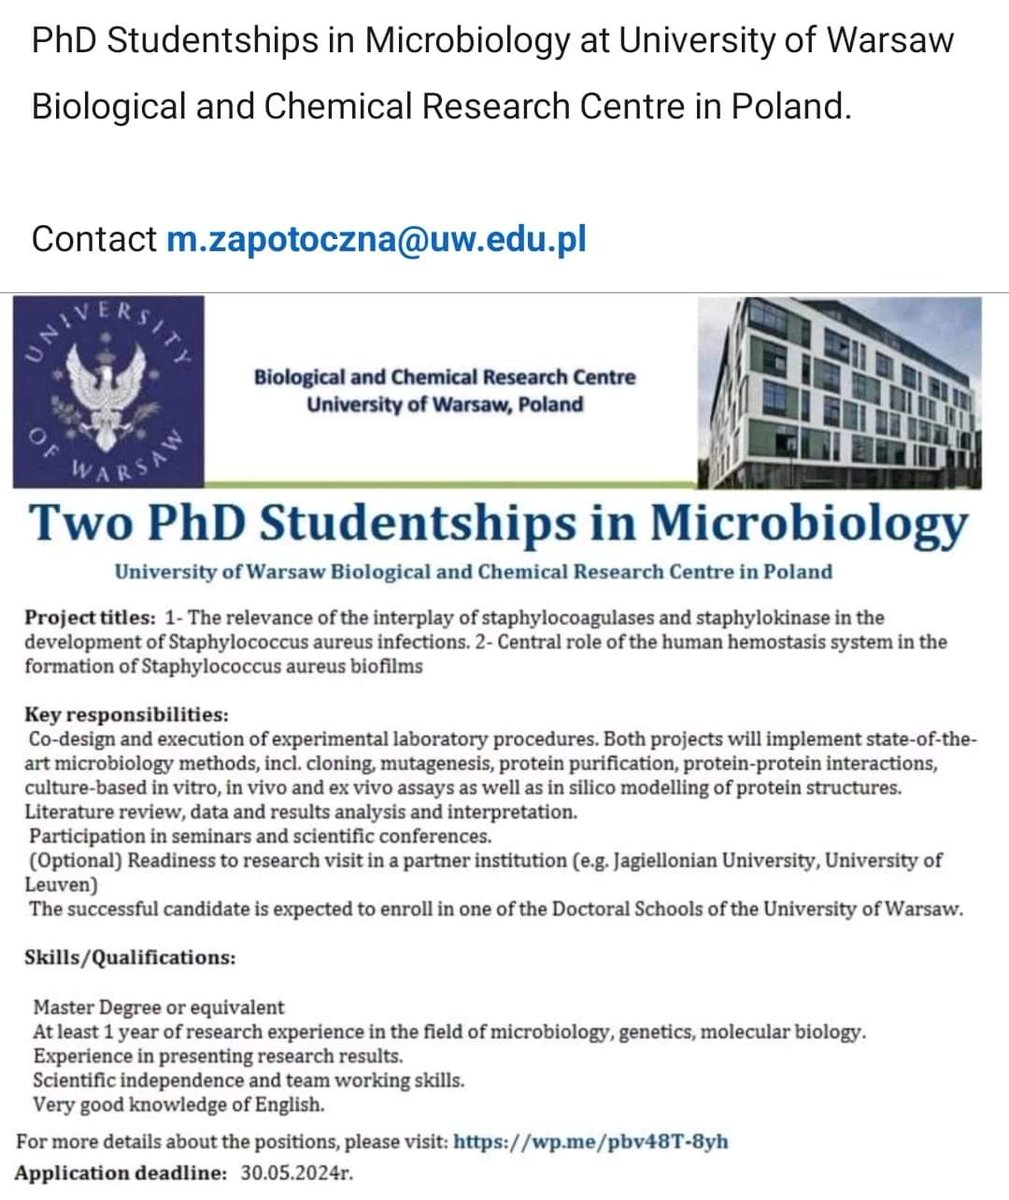 Funded #PhD in Microbiology Background: Microbiology, Genetics, Molecular Biology #Poland